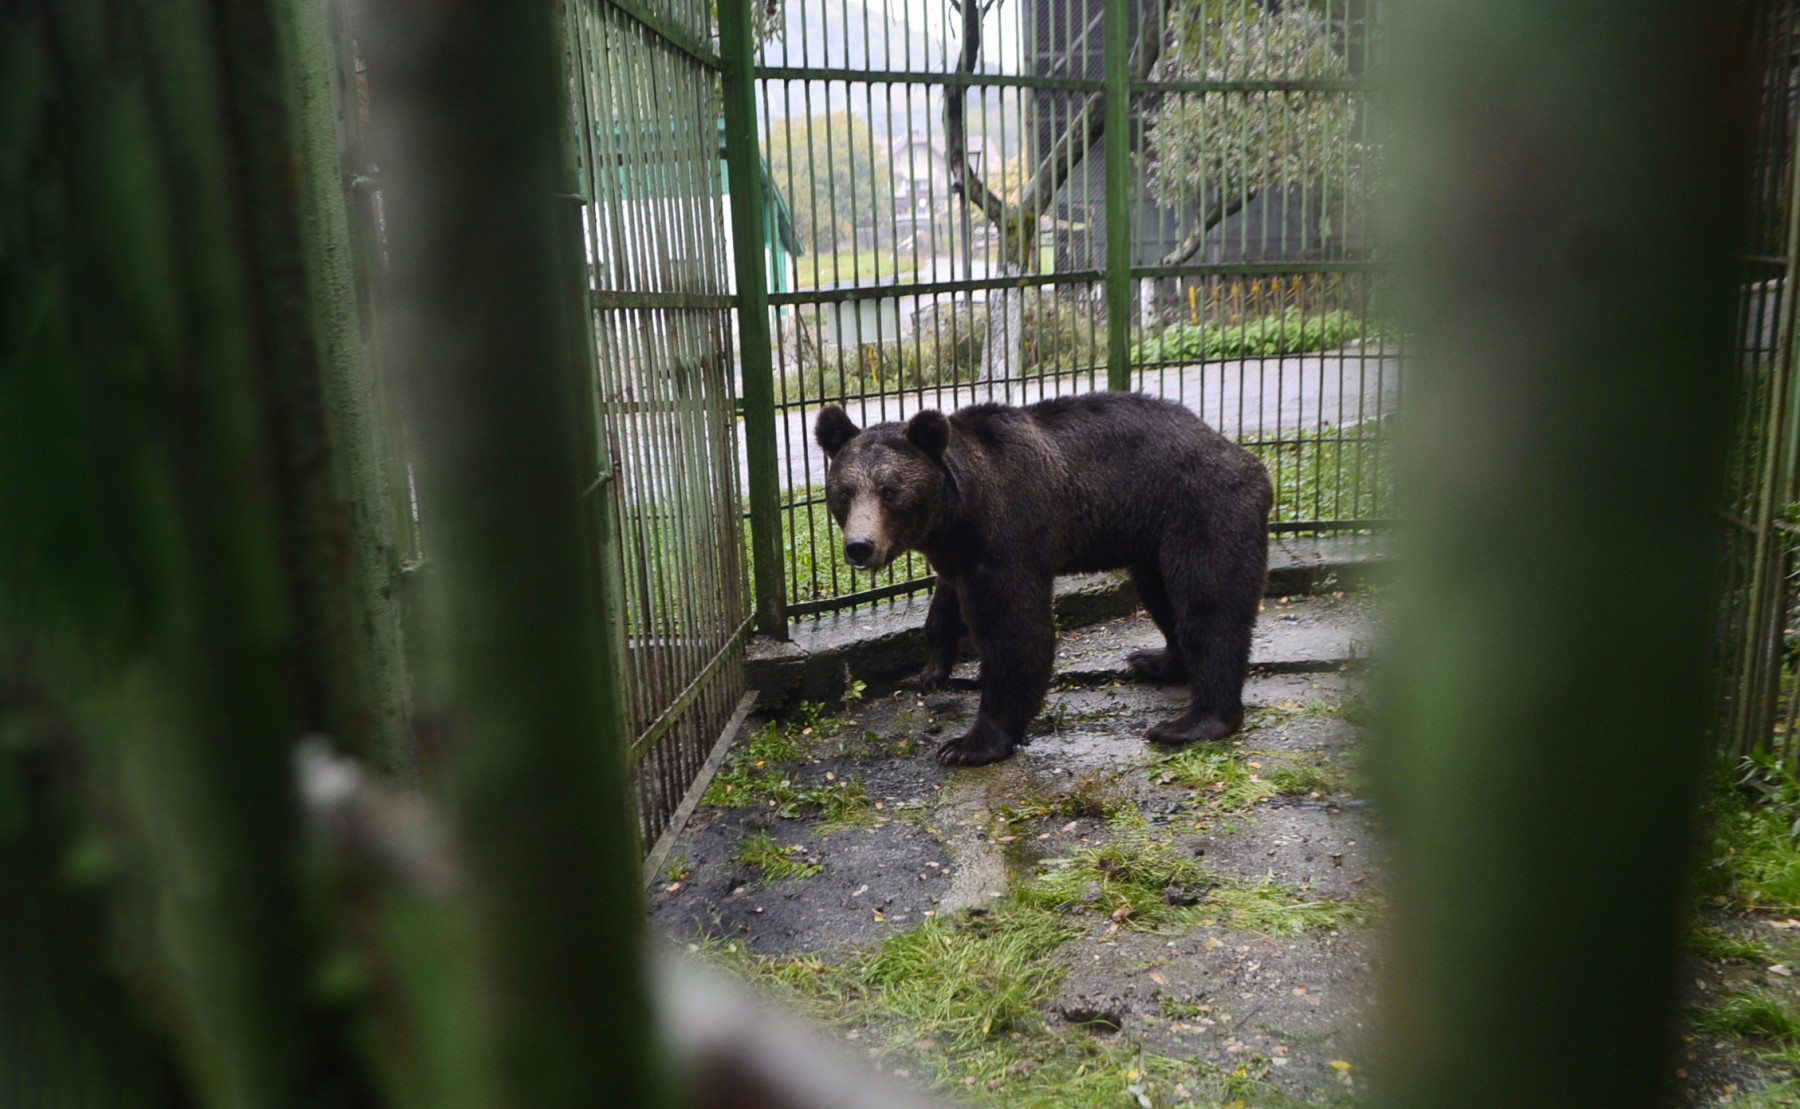 A bear captive in a cage